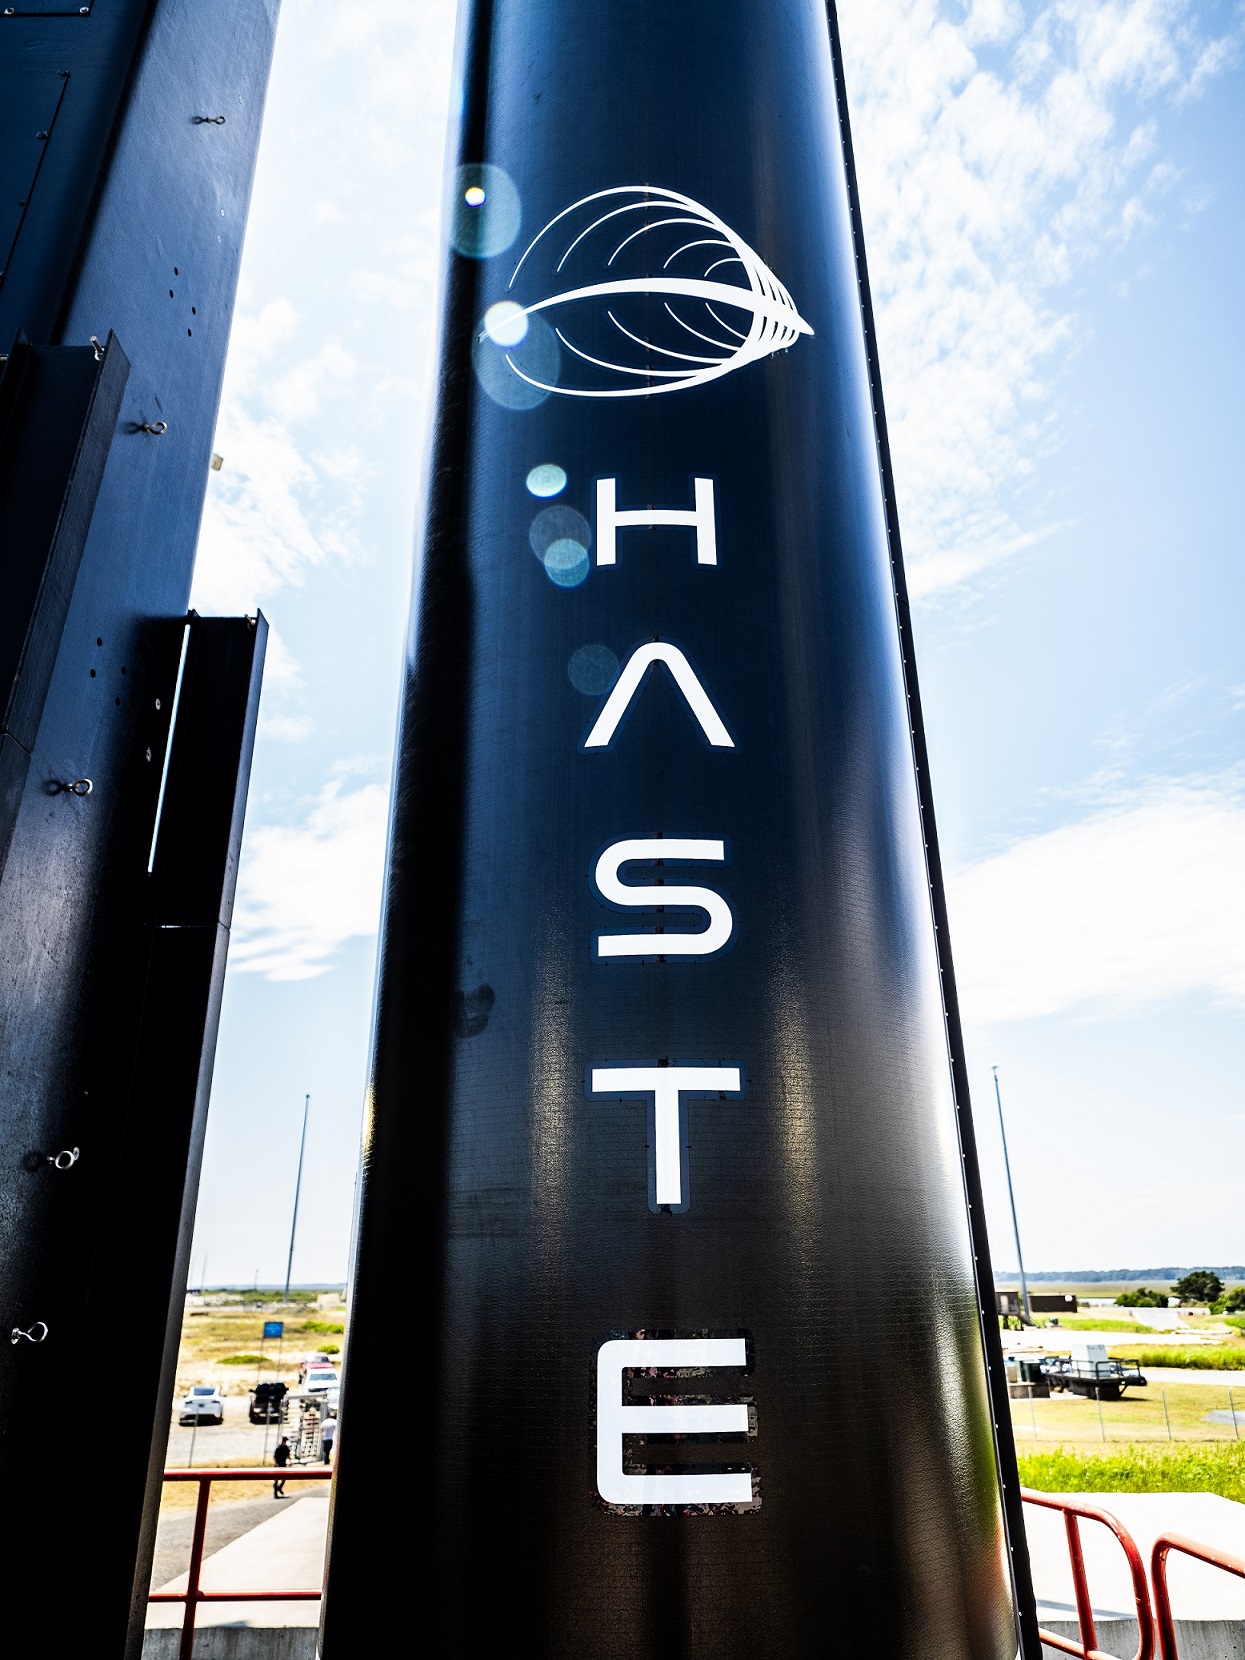 Rocket Lab Adds New HASTE Launch from Virginia for the Department of Defense’s Defense Innovation Unit